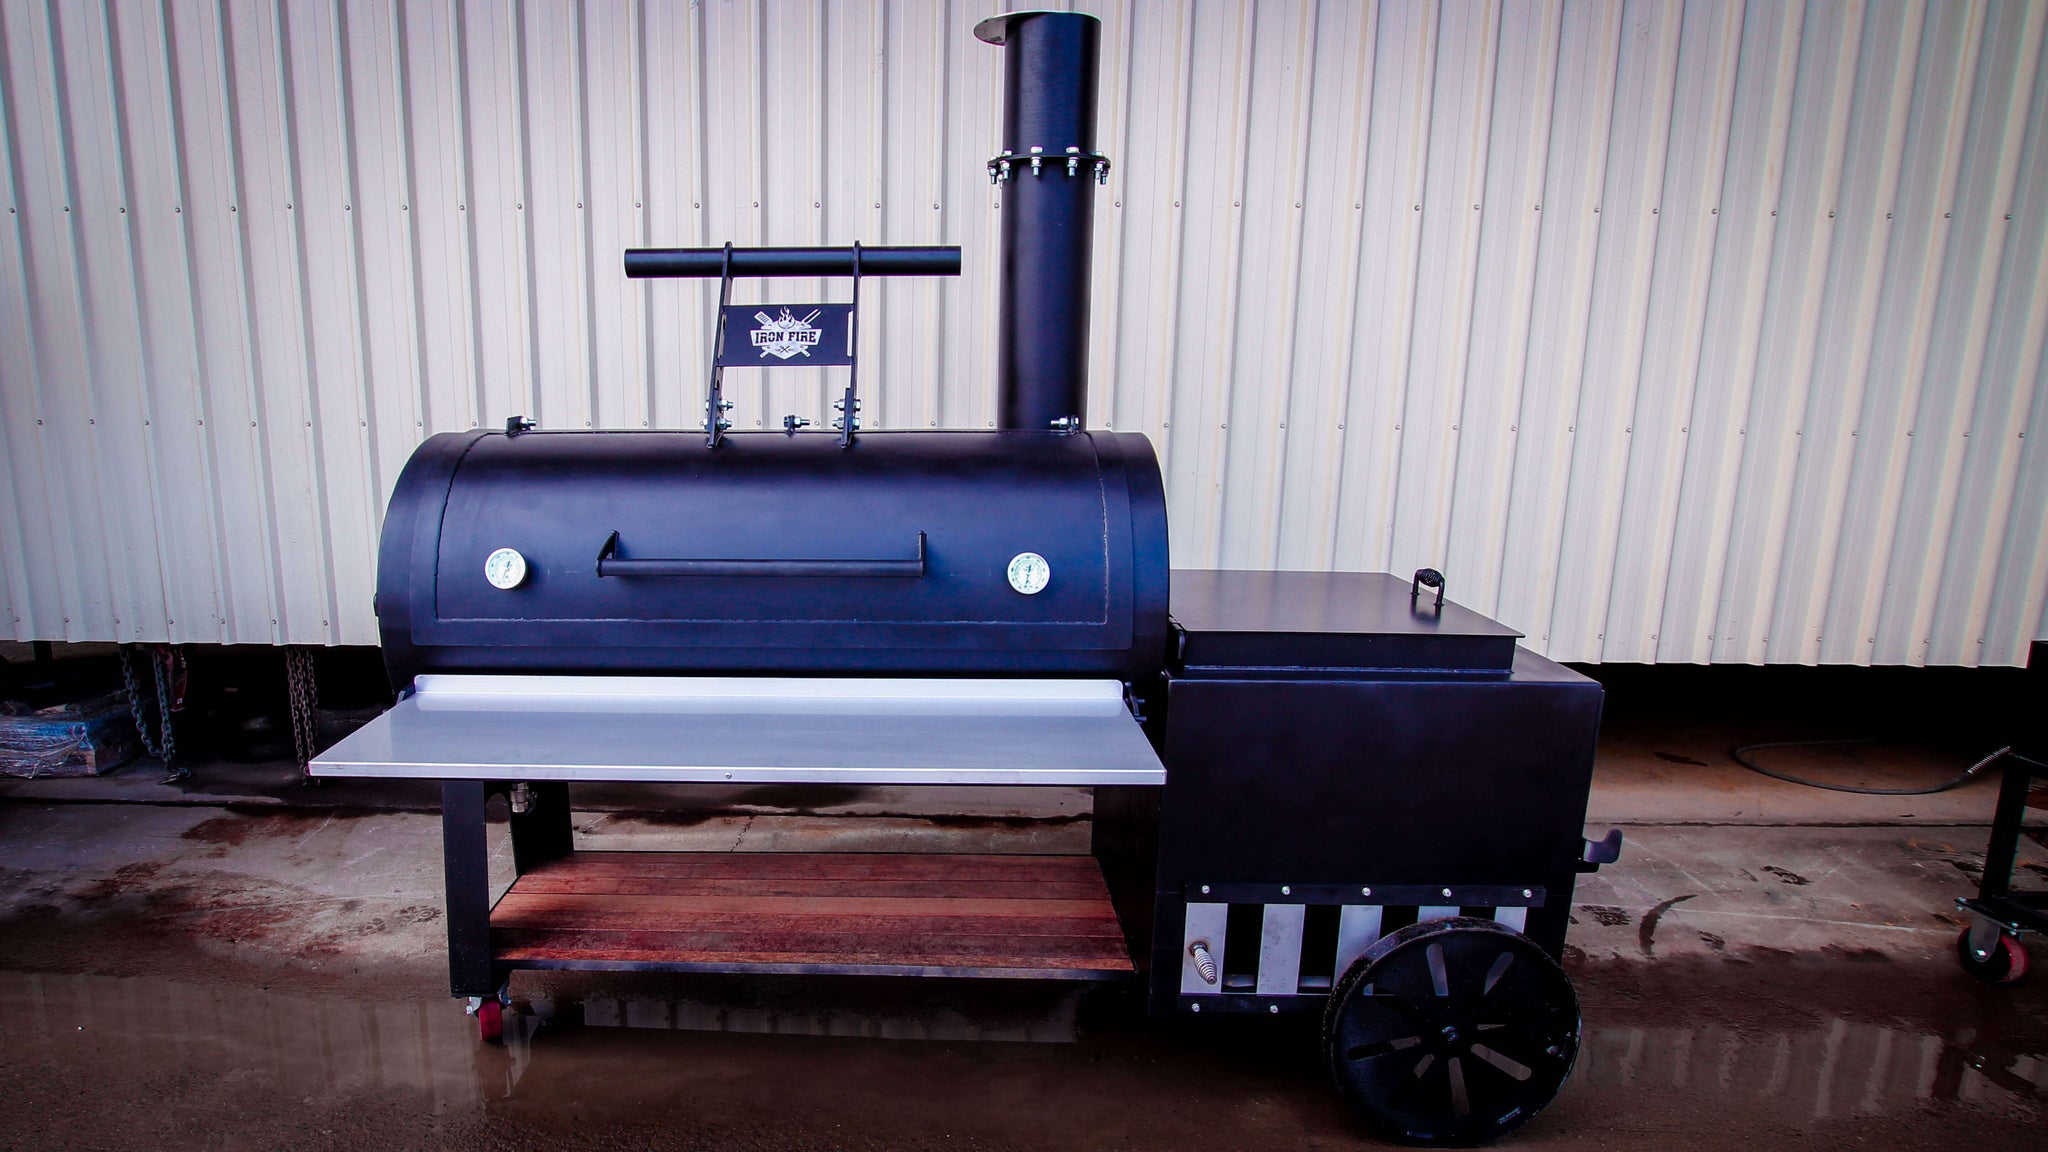 16" SMOKER WITH FIRE BOX GRILL - LEGACY